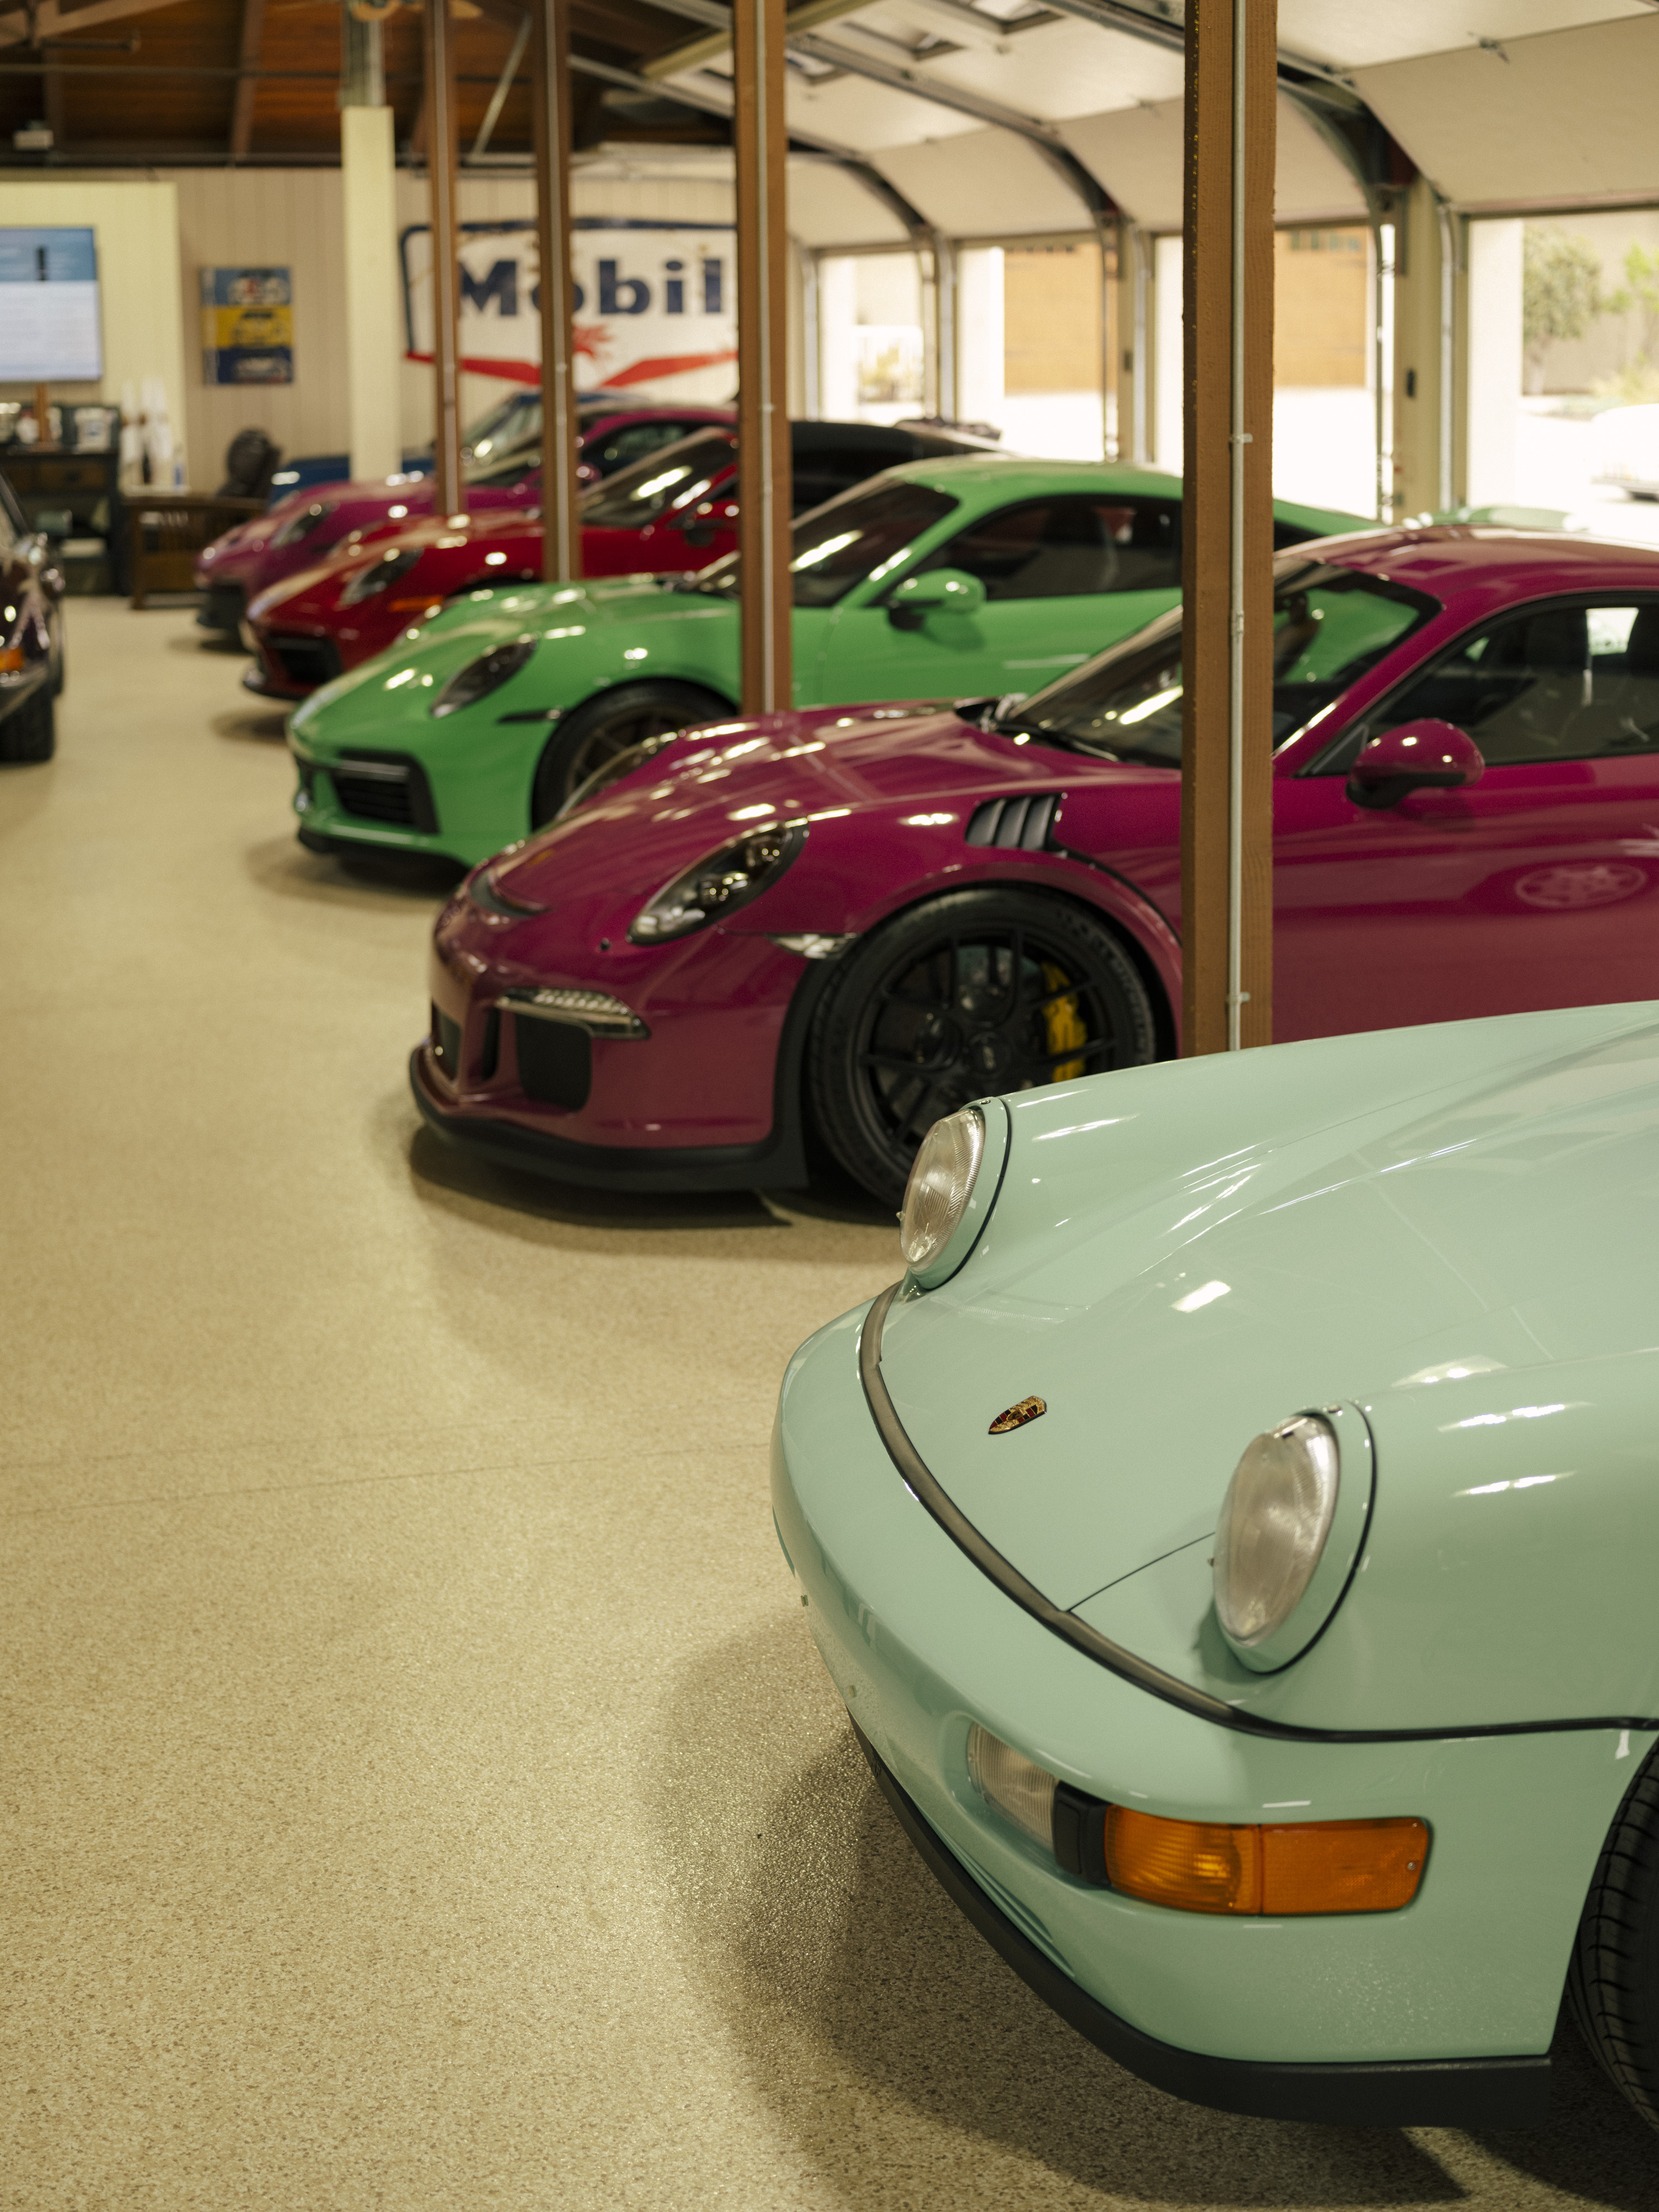 Line-up of colourful Porsche 911 cars in a garage